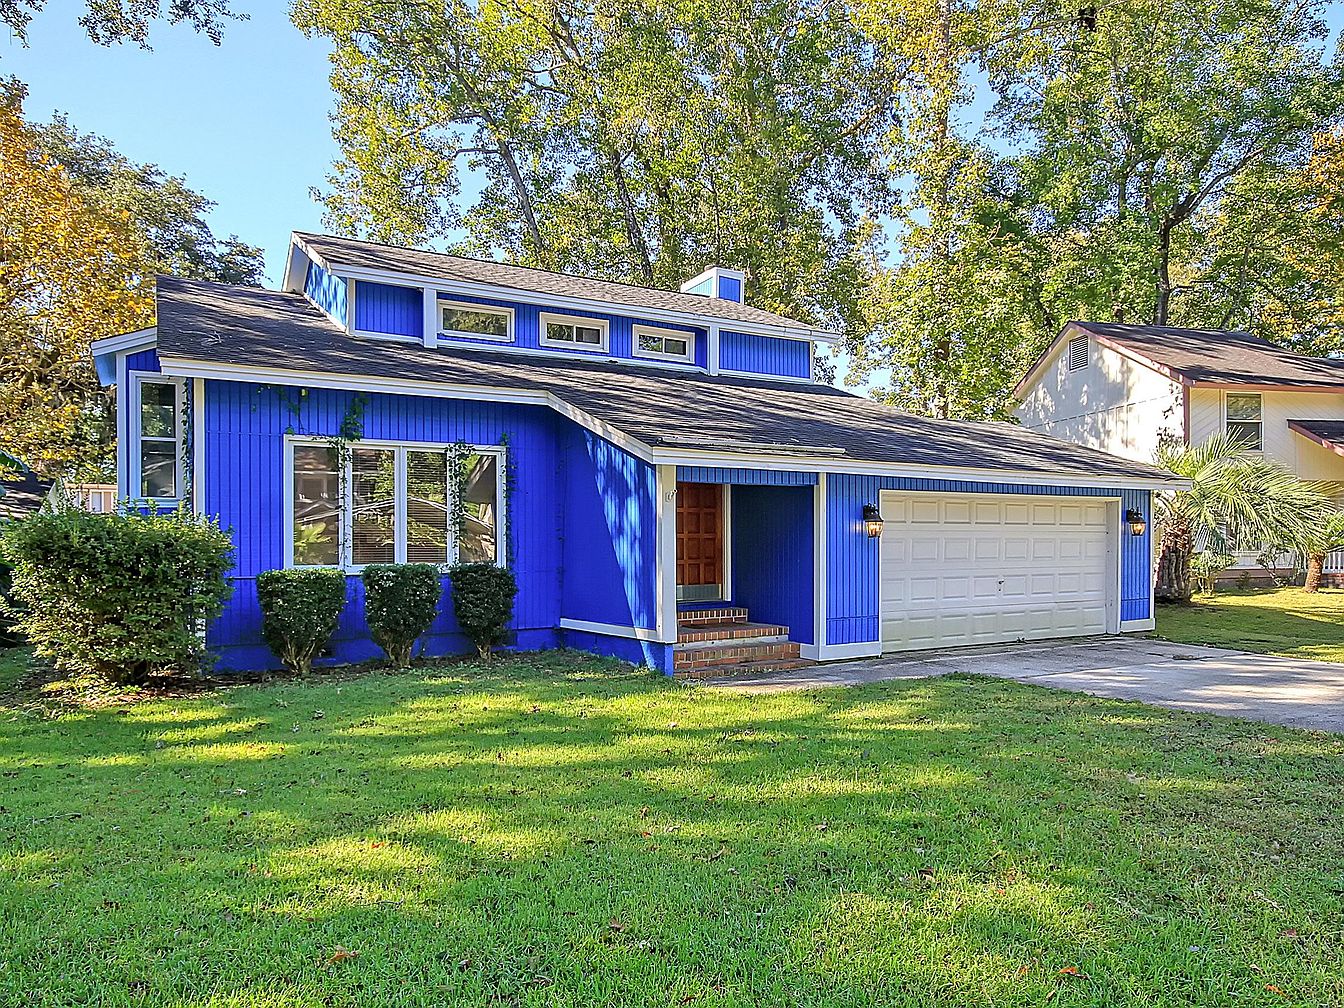 123 Lewisfield Dr, North Charleston, SC 29418 | Zillow